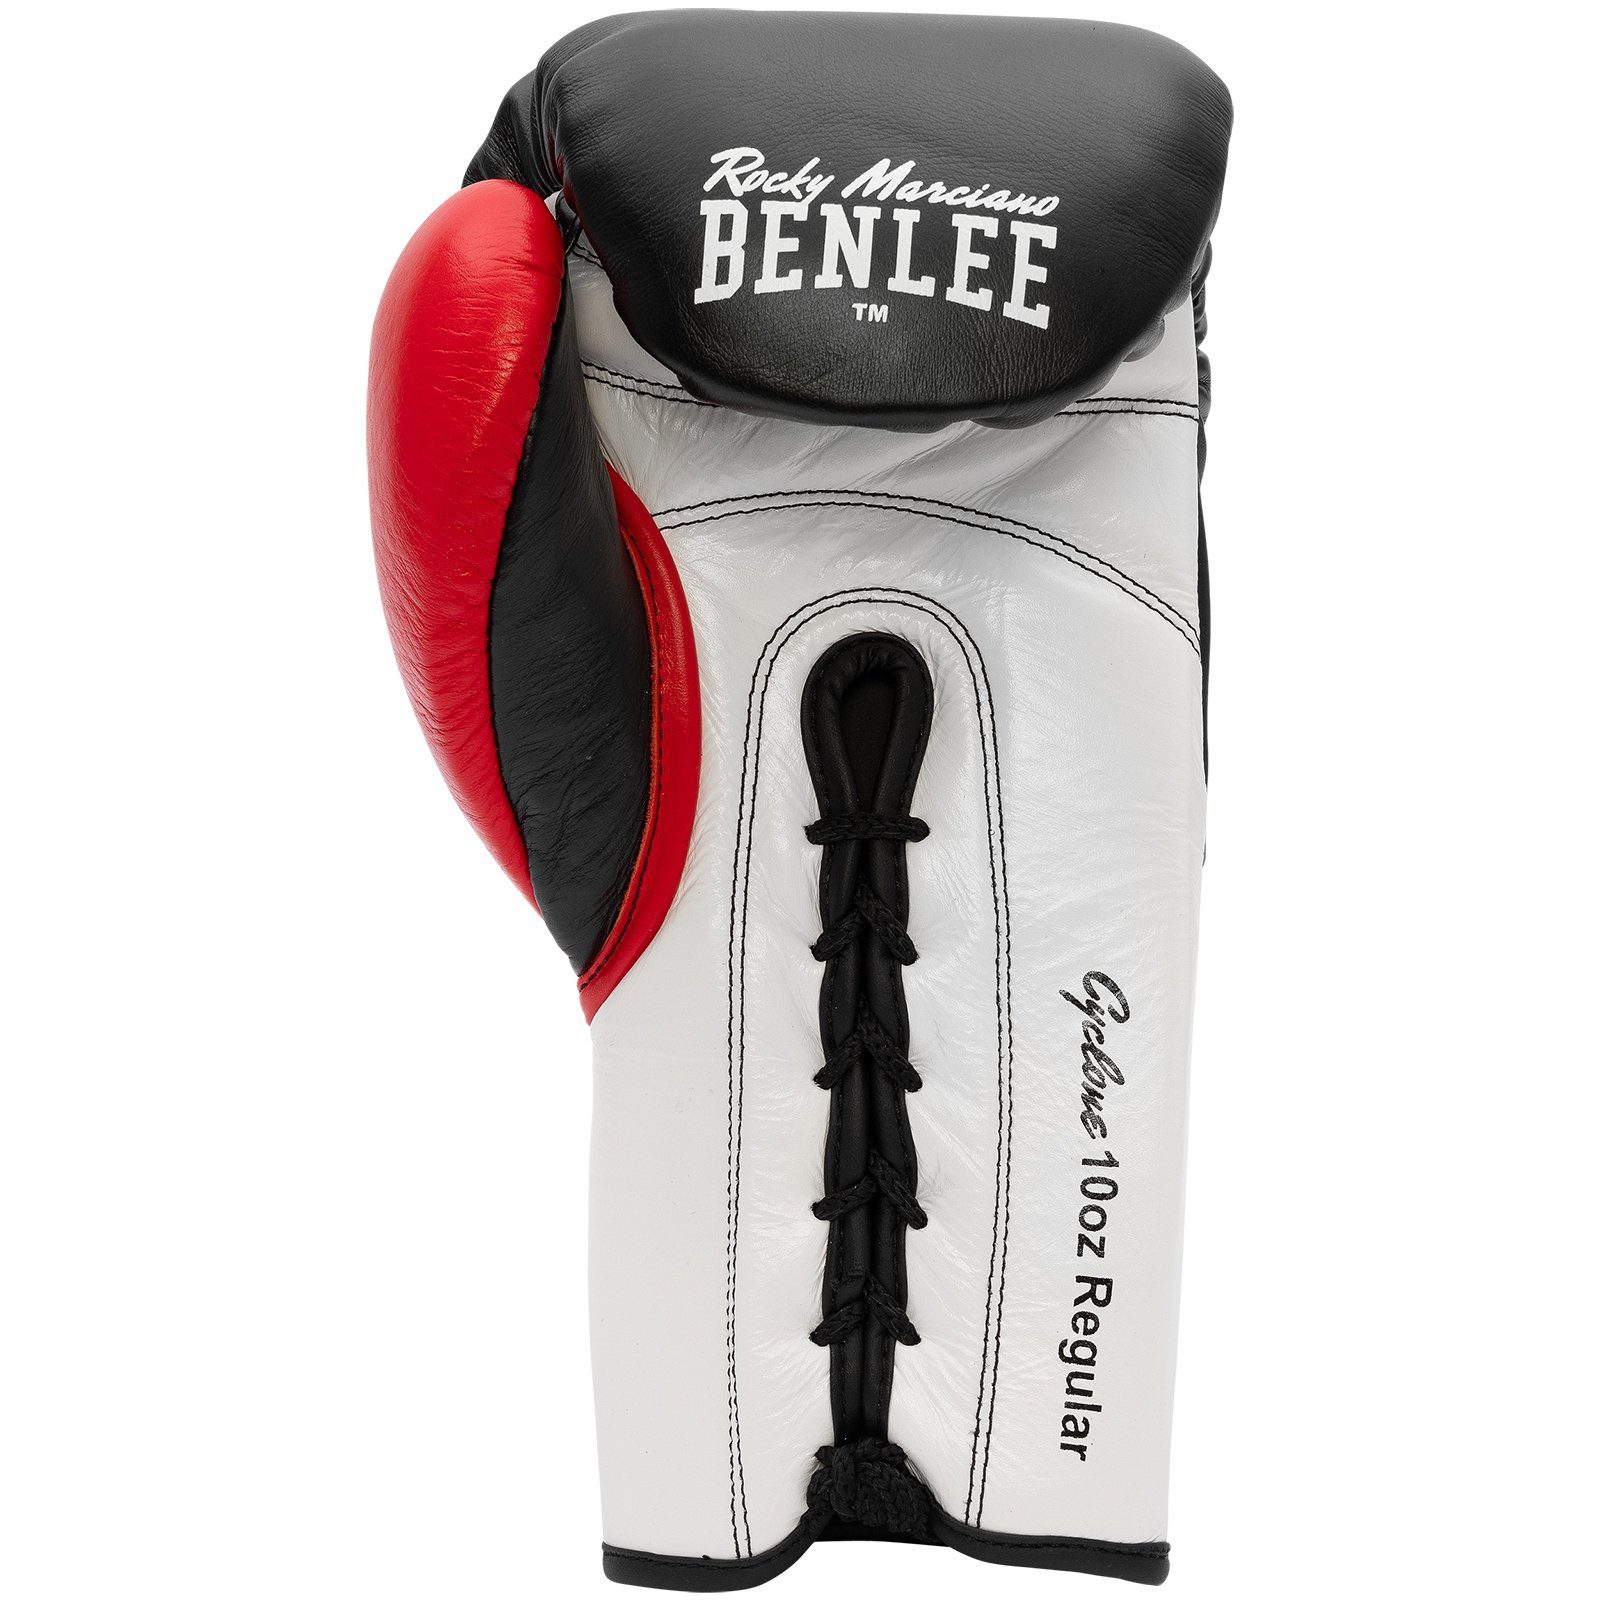 Benlee Rocky CYCLONE Marciano Boxhandschuhe Black/Red/White